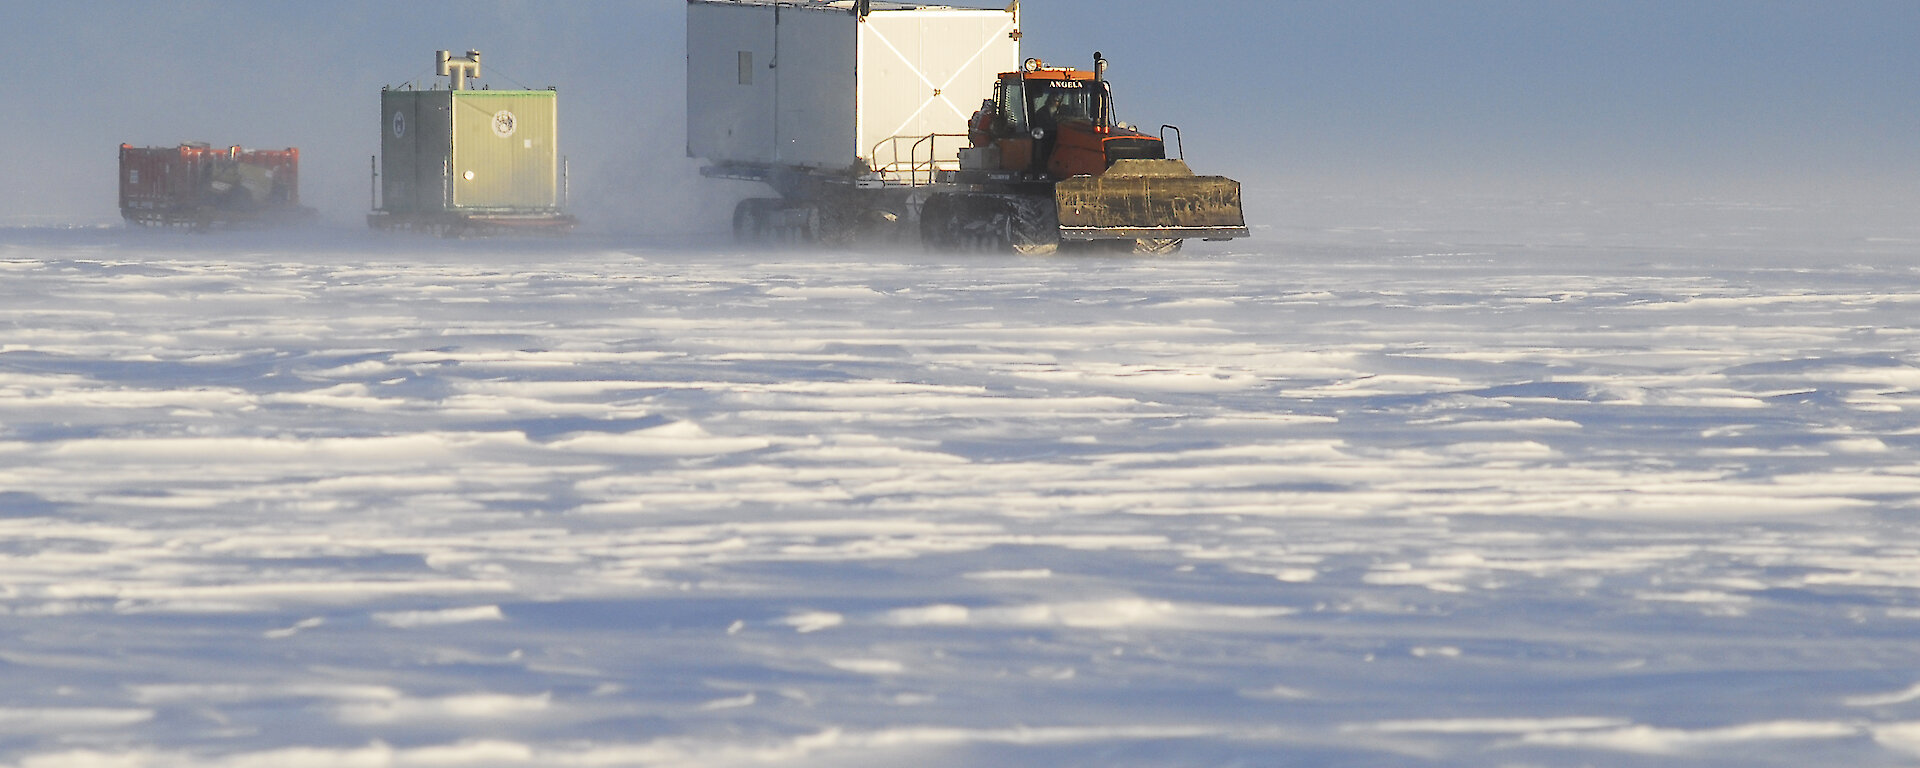 A large tractor towing container sleds across the ice